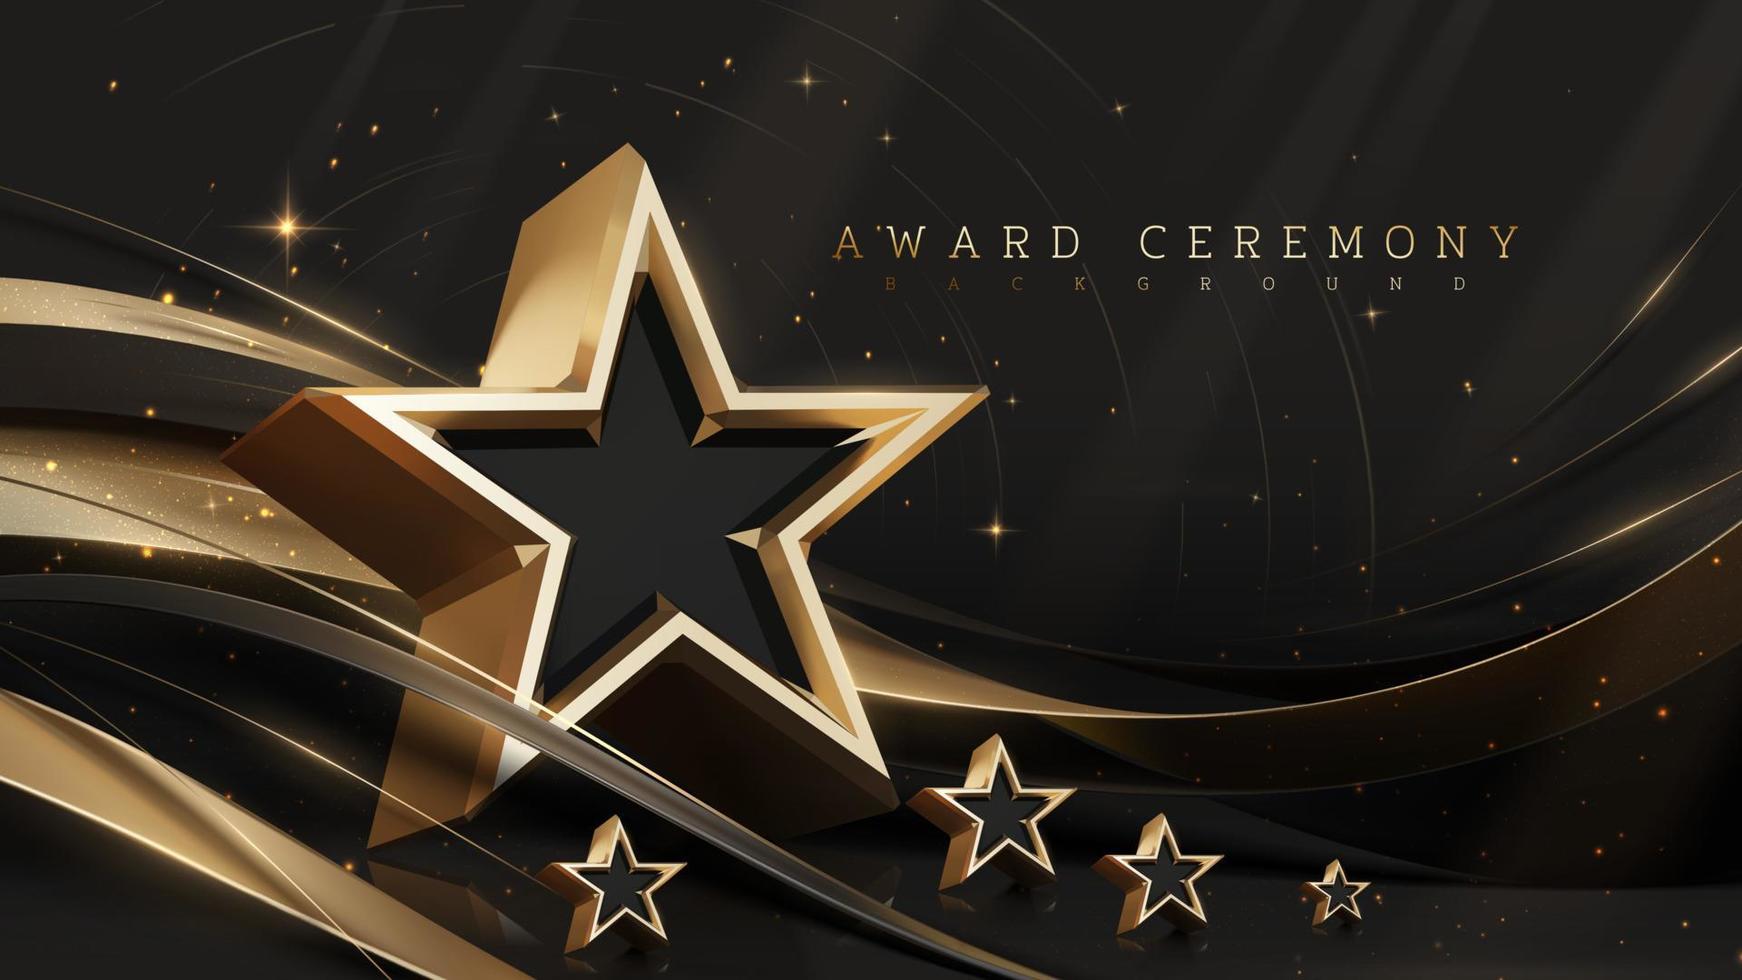 Award ceremony background with 3d gold star and ribbon element and